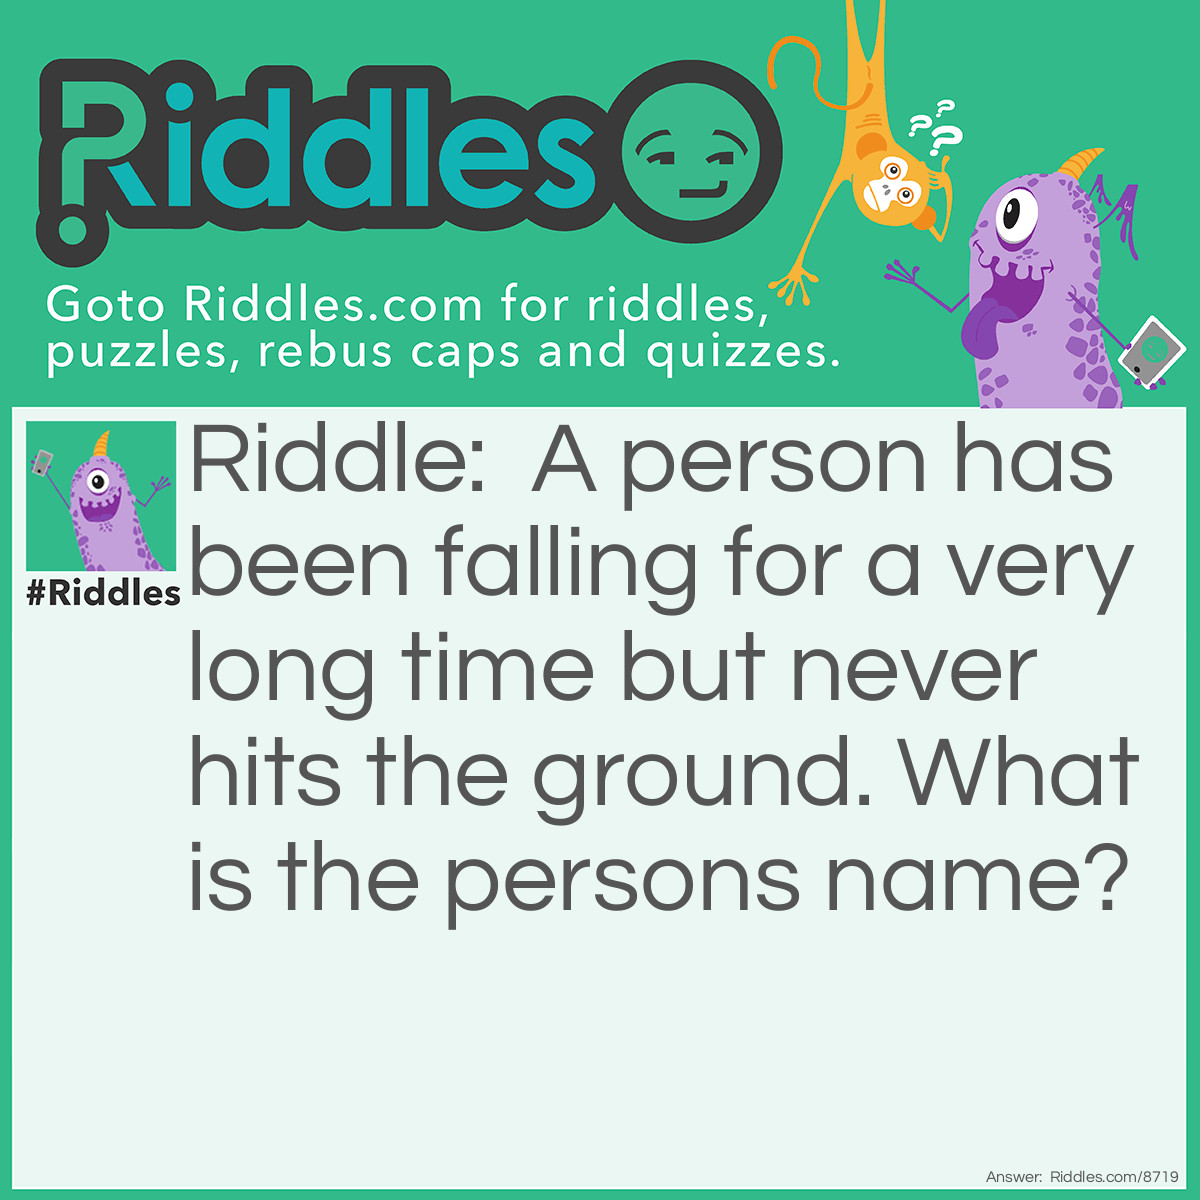 Riddle: A person has been falling for a very long time but never hits the ground. What is the persons name? Answer: The persons name is YOU, because you are falling through space forever (science)